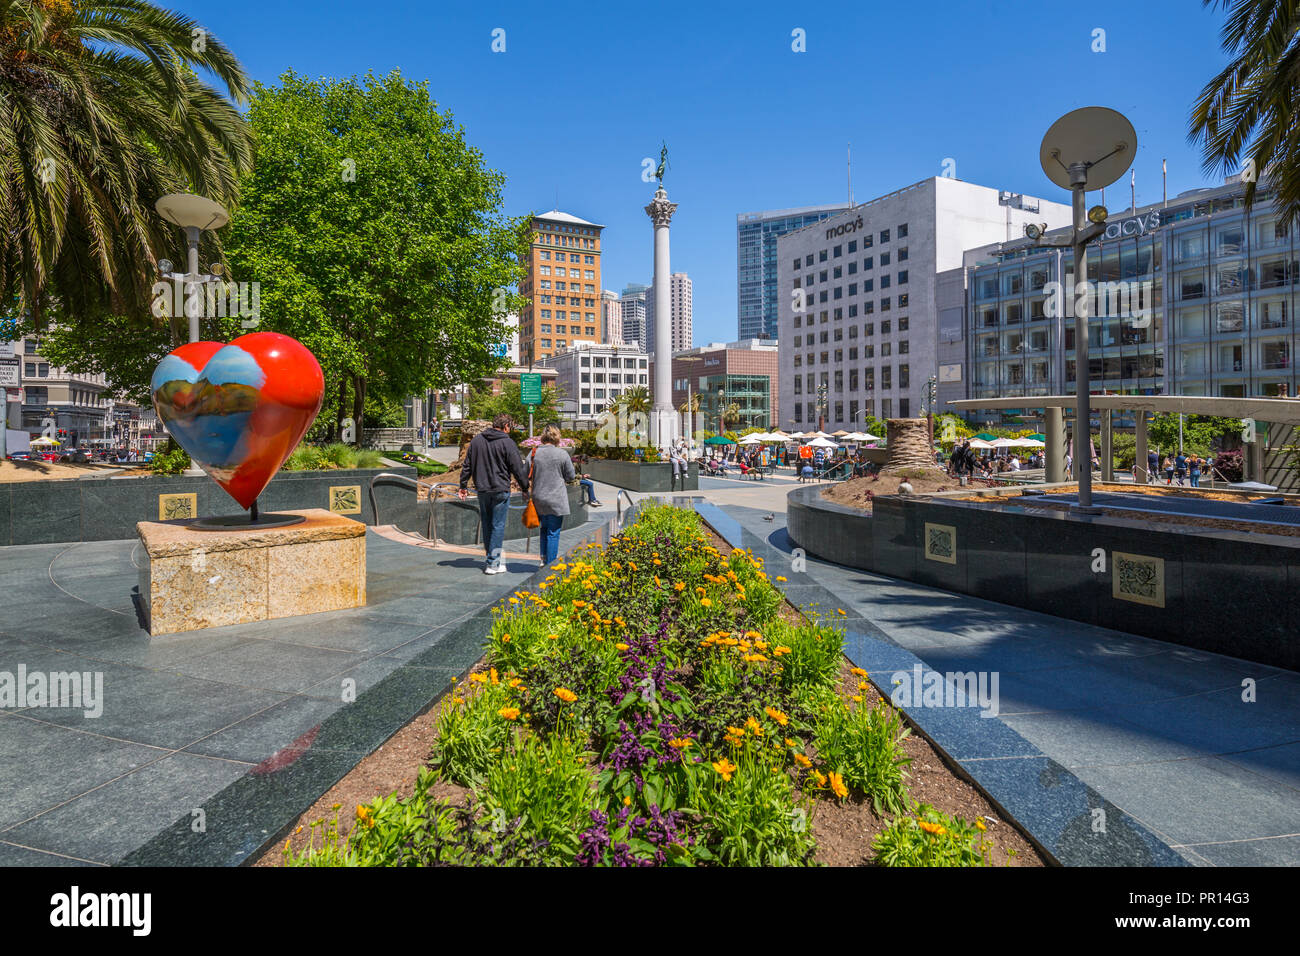 View of buildings and visitors in Union Square, San Francisco, California, United States of America, North America Stock Photo